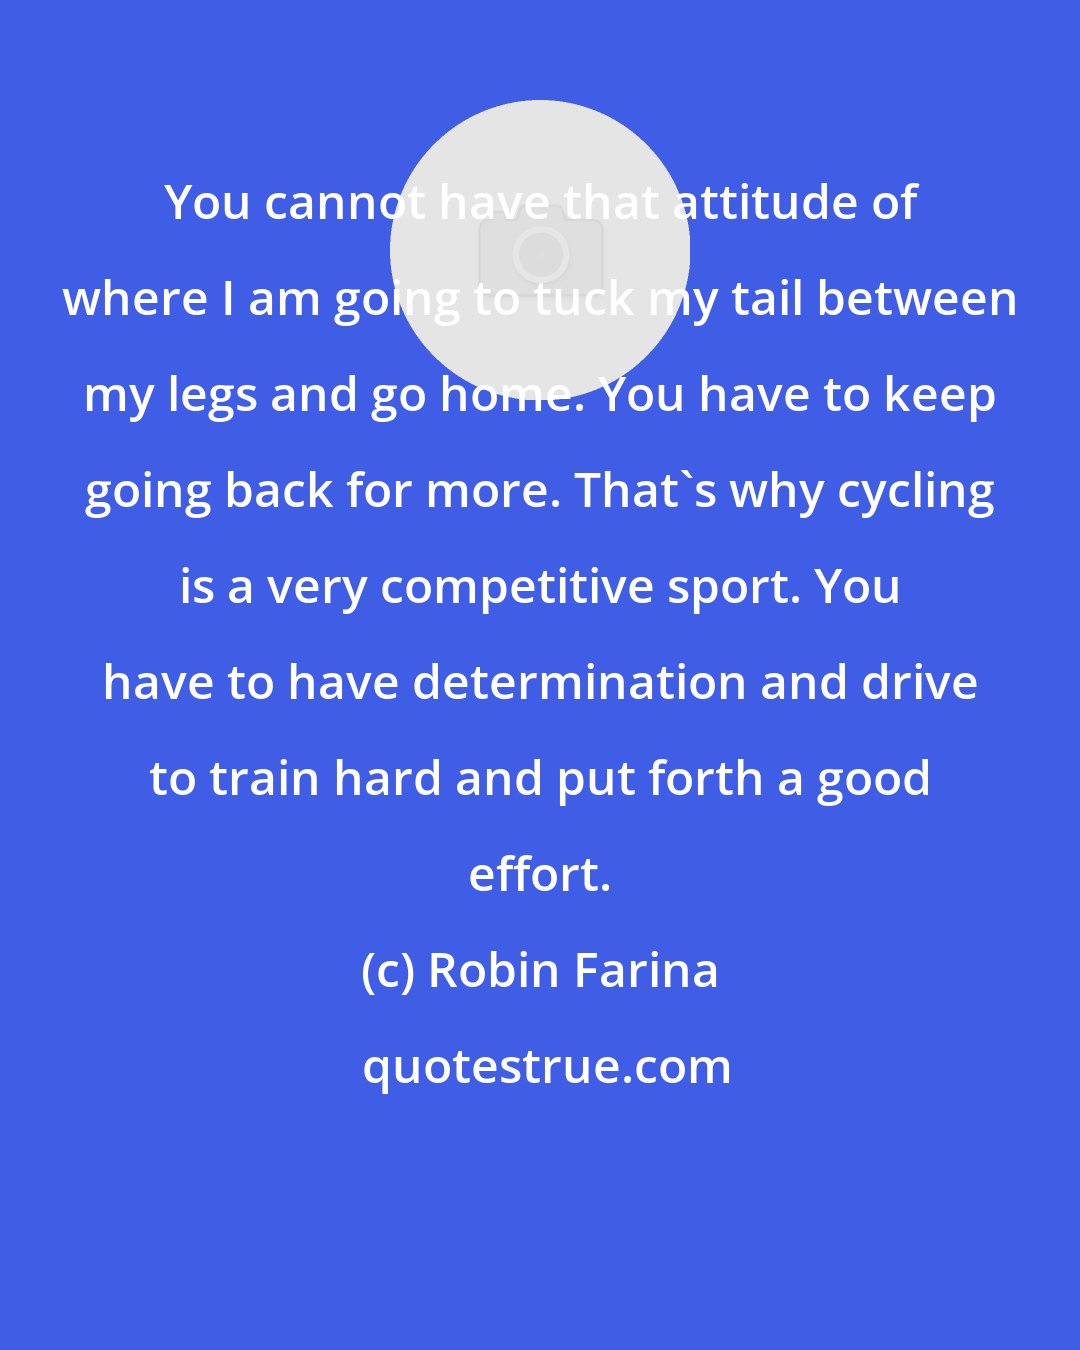 Robin Farina: You cannot have that attitude of where I am going to tuck my tail between my legs and go home. You have to keep going back for more. That's why cycling is a very competitive sport. You have to have determination and drive to train hard and put forth a good effort.